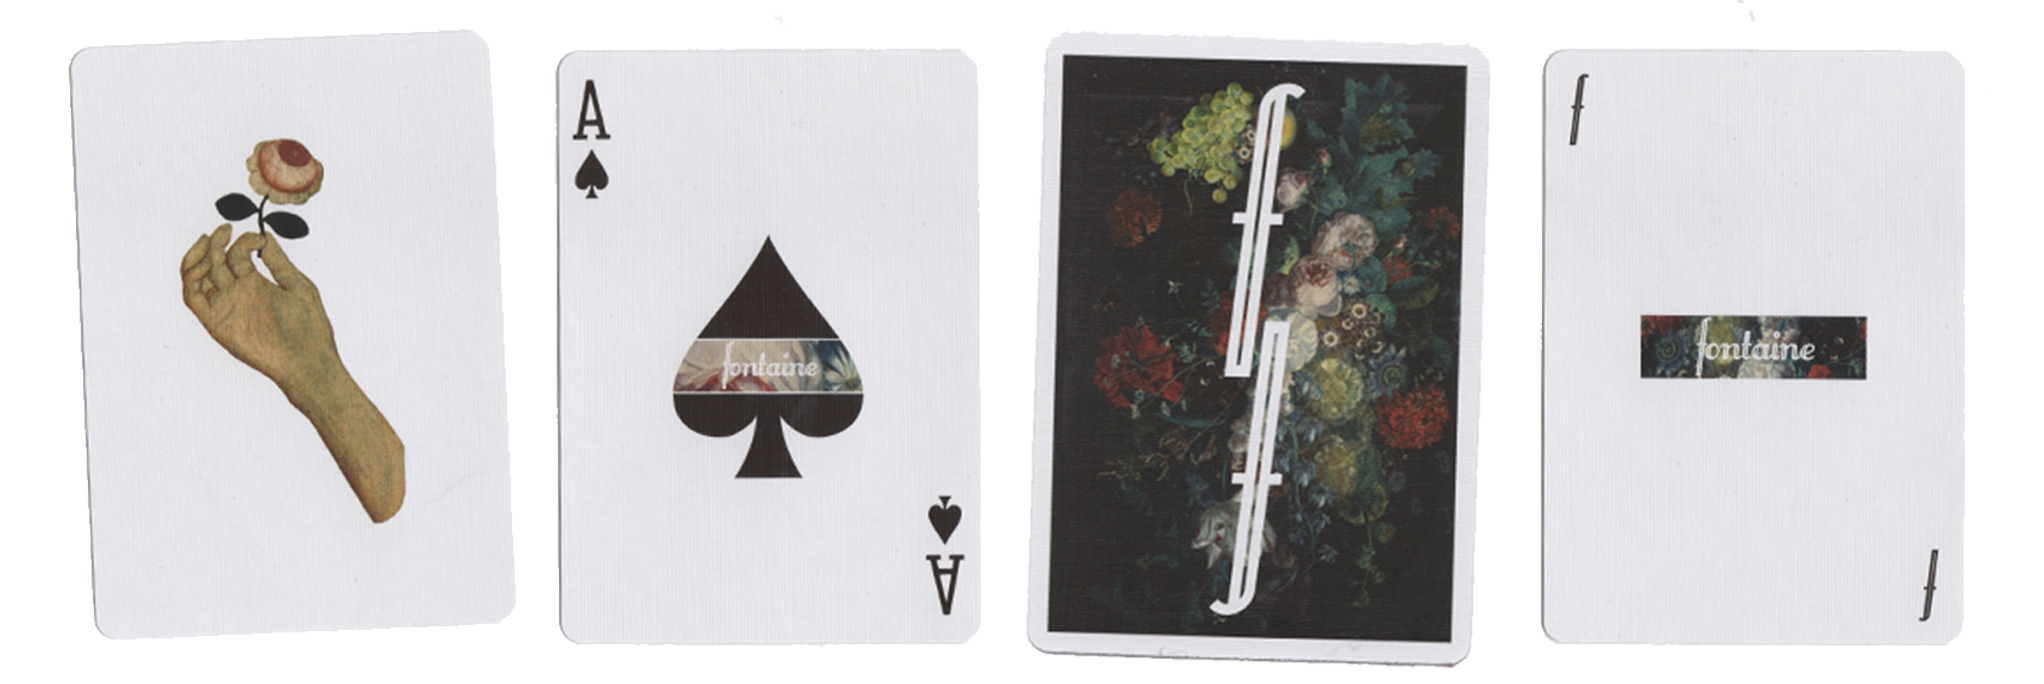 Fontaine Futures — FONTAINE CARDS